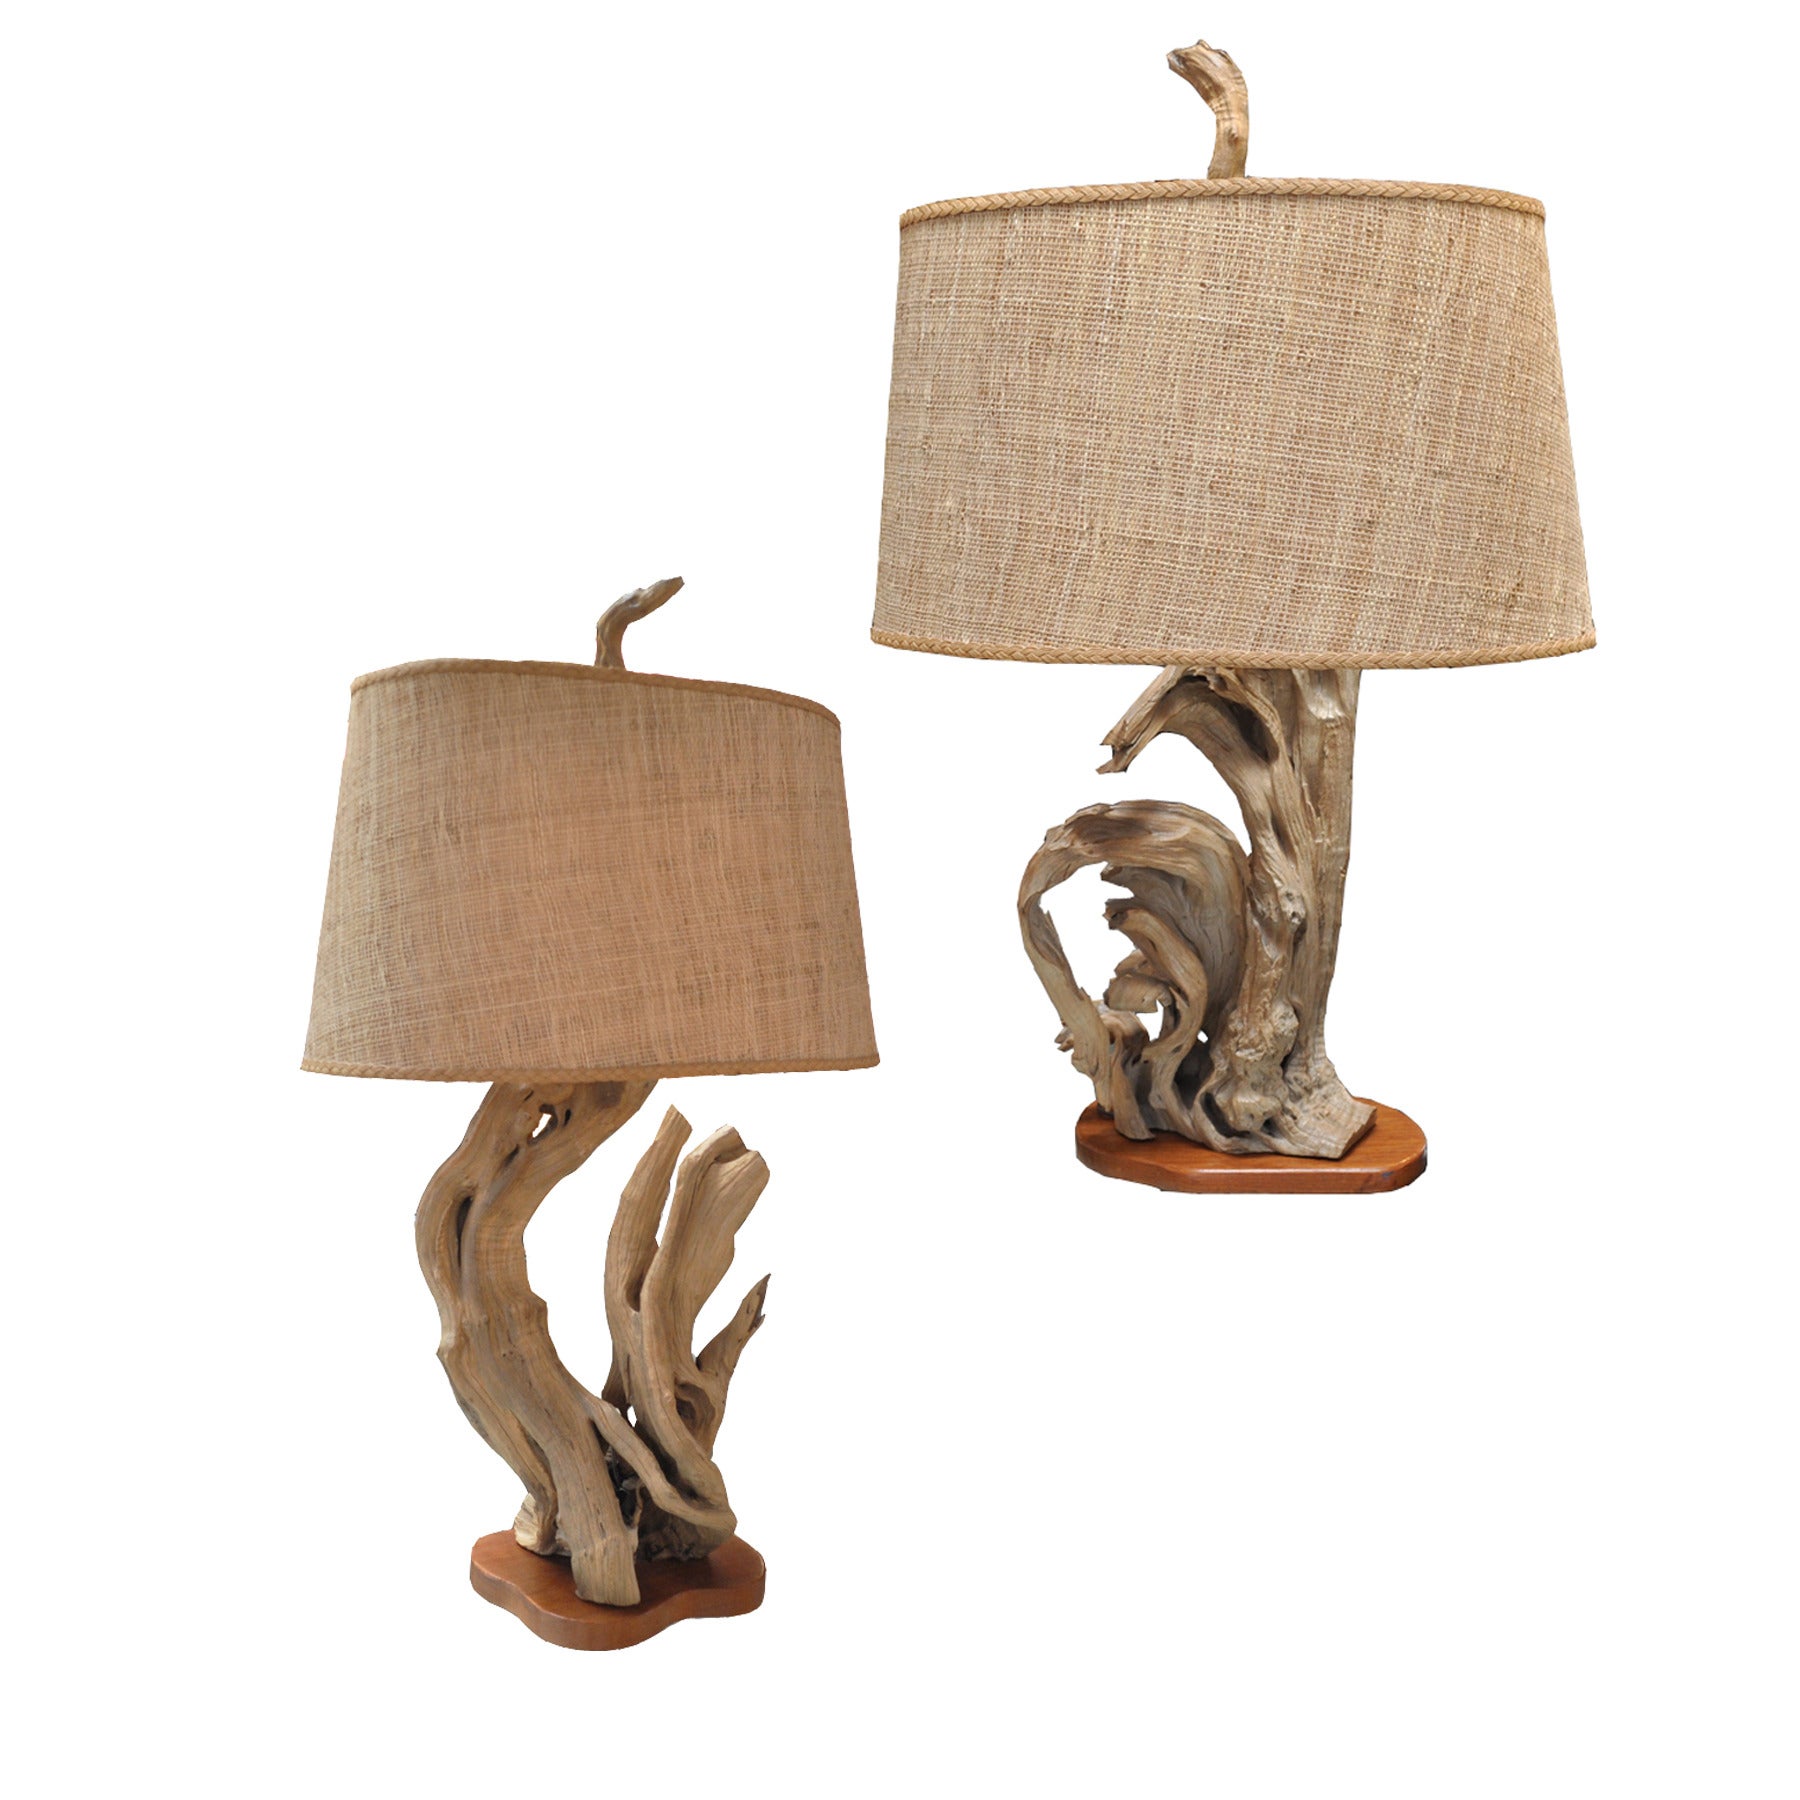 Pair Of Driftwood Creations Lamps By Nunzi